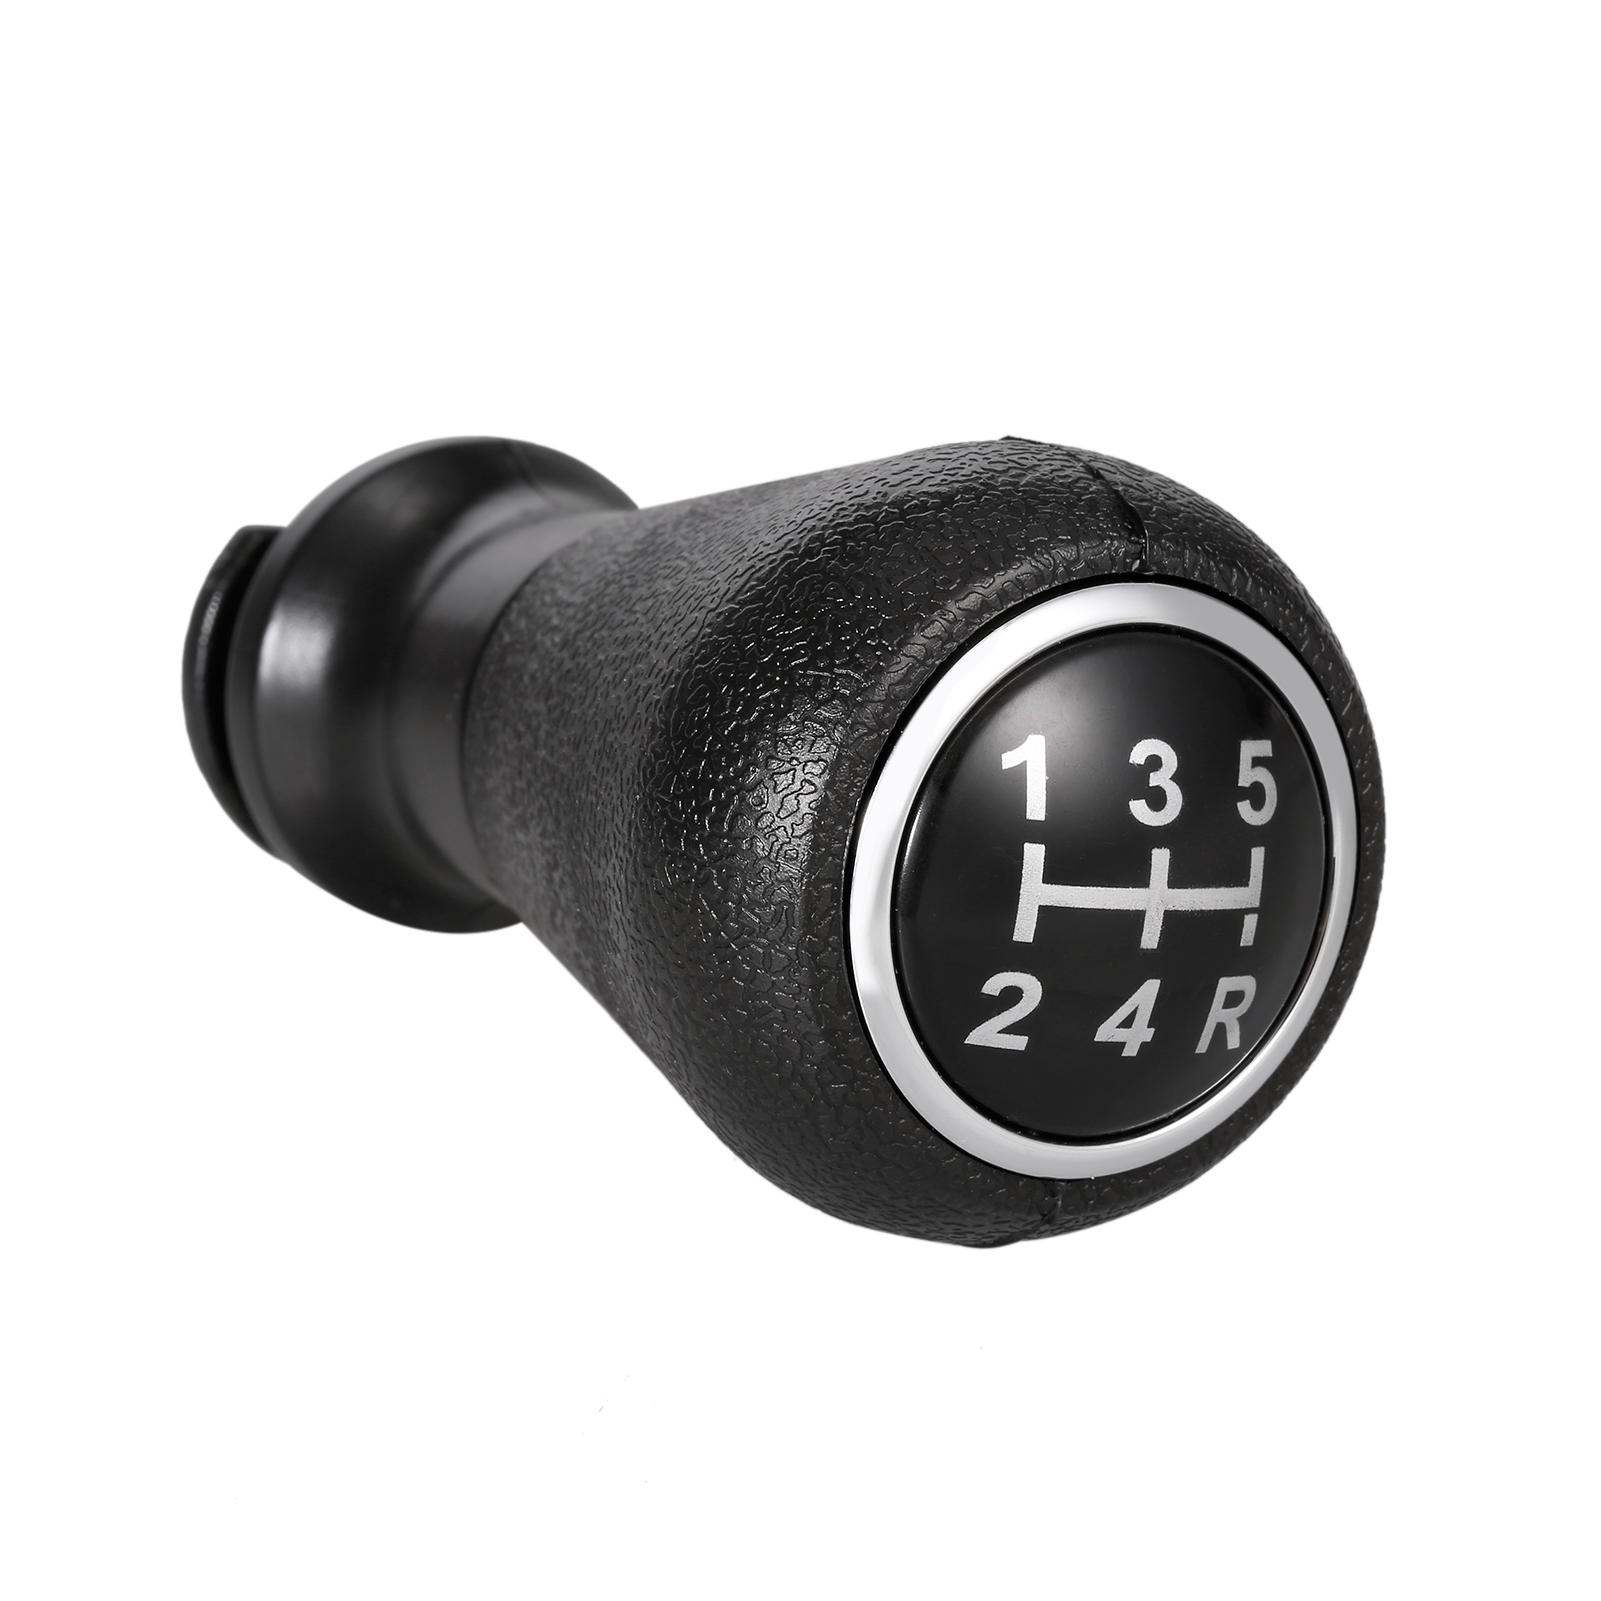 5 Speed Gear Shift Knob Head Replacement for PEUGEOT 106 206 306 406 207 307 407 408 508 605 607 807